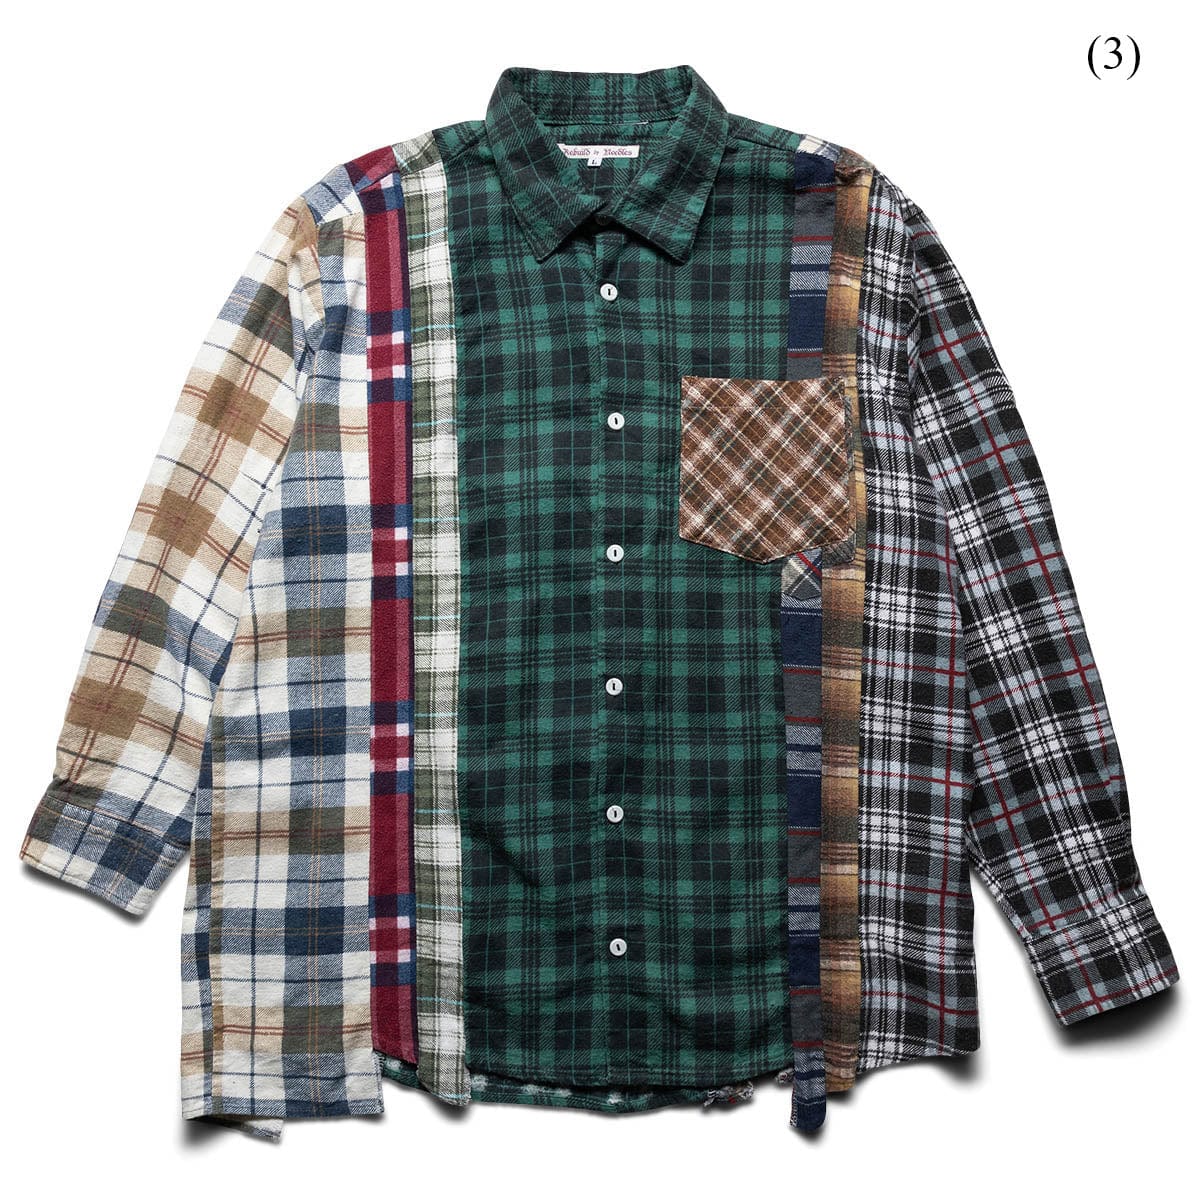 Needles Shirts ASSORTED / L (3) FLANNEL SHIRT - 7 CUTS SHIRT (LARGE/MULTIPLE STYLES)